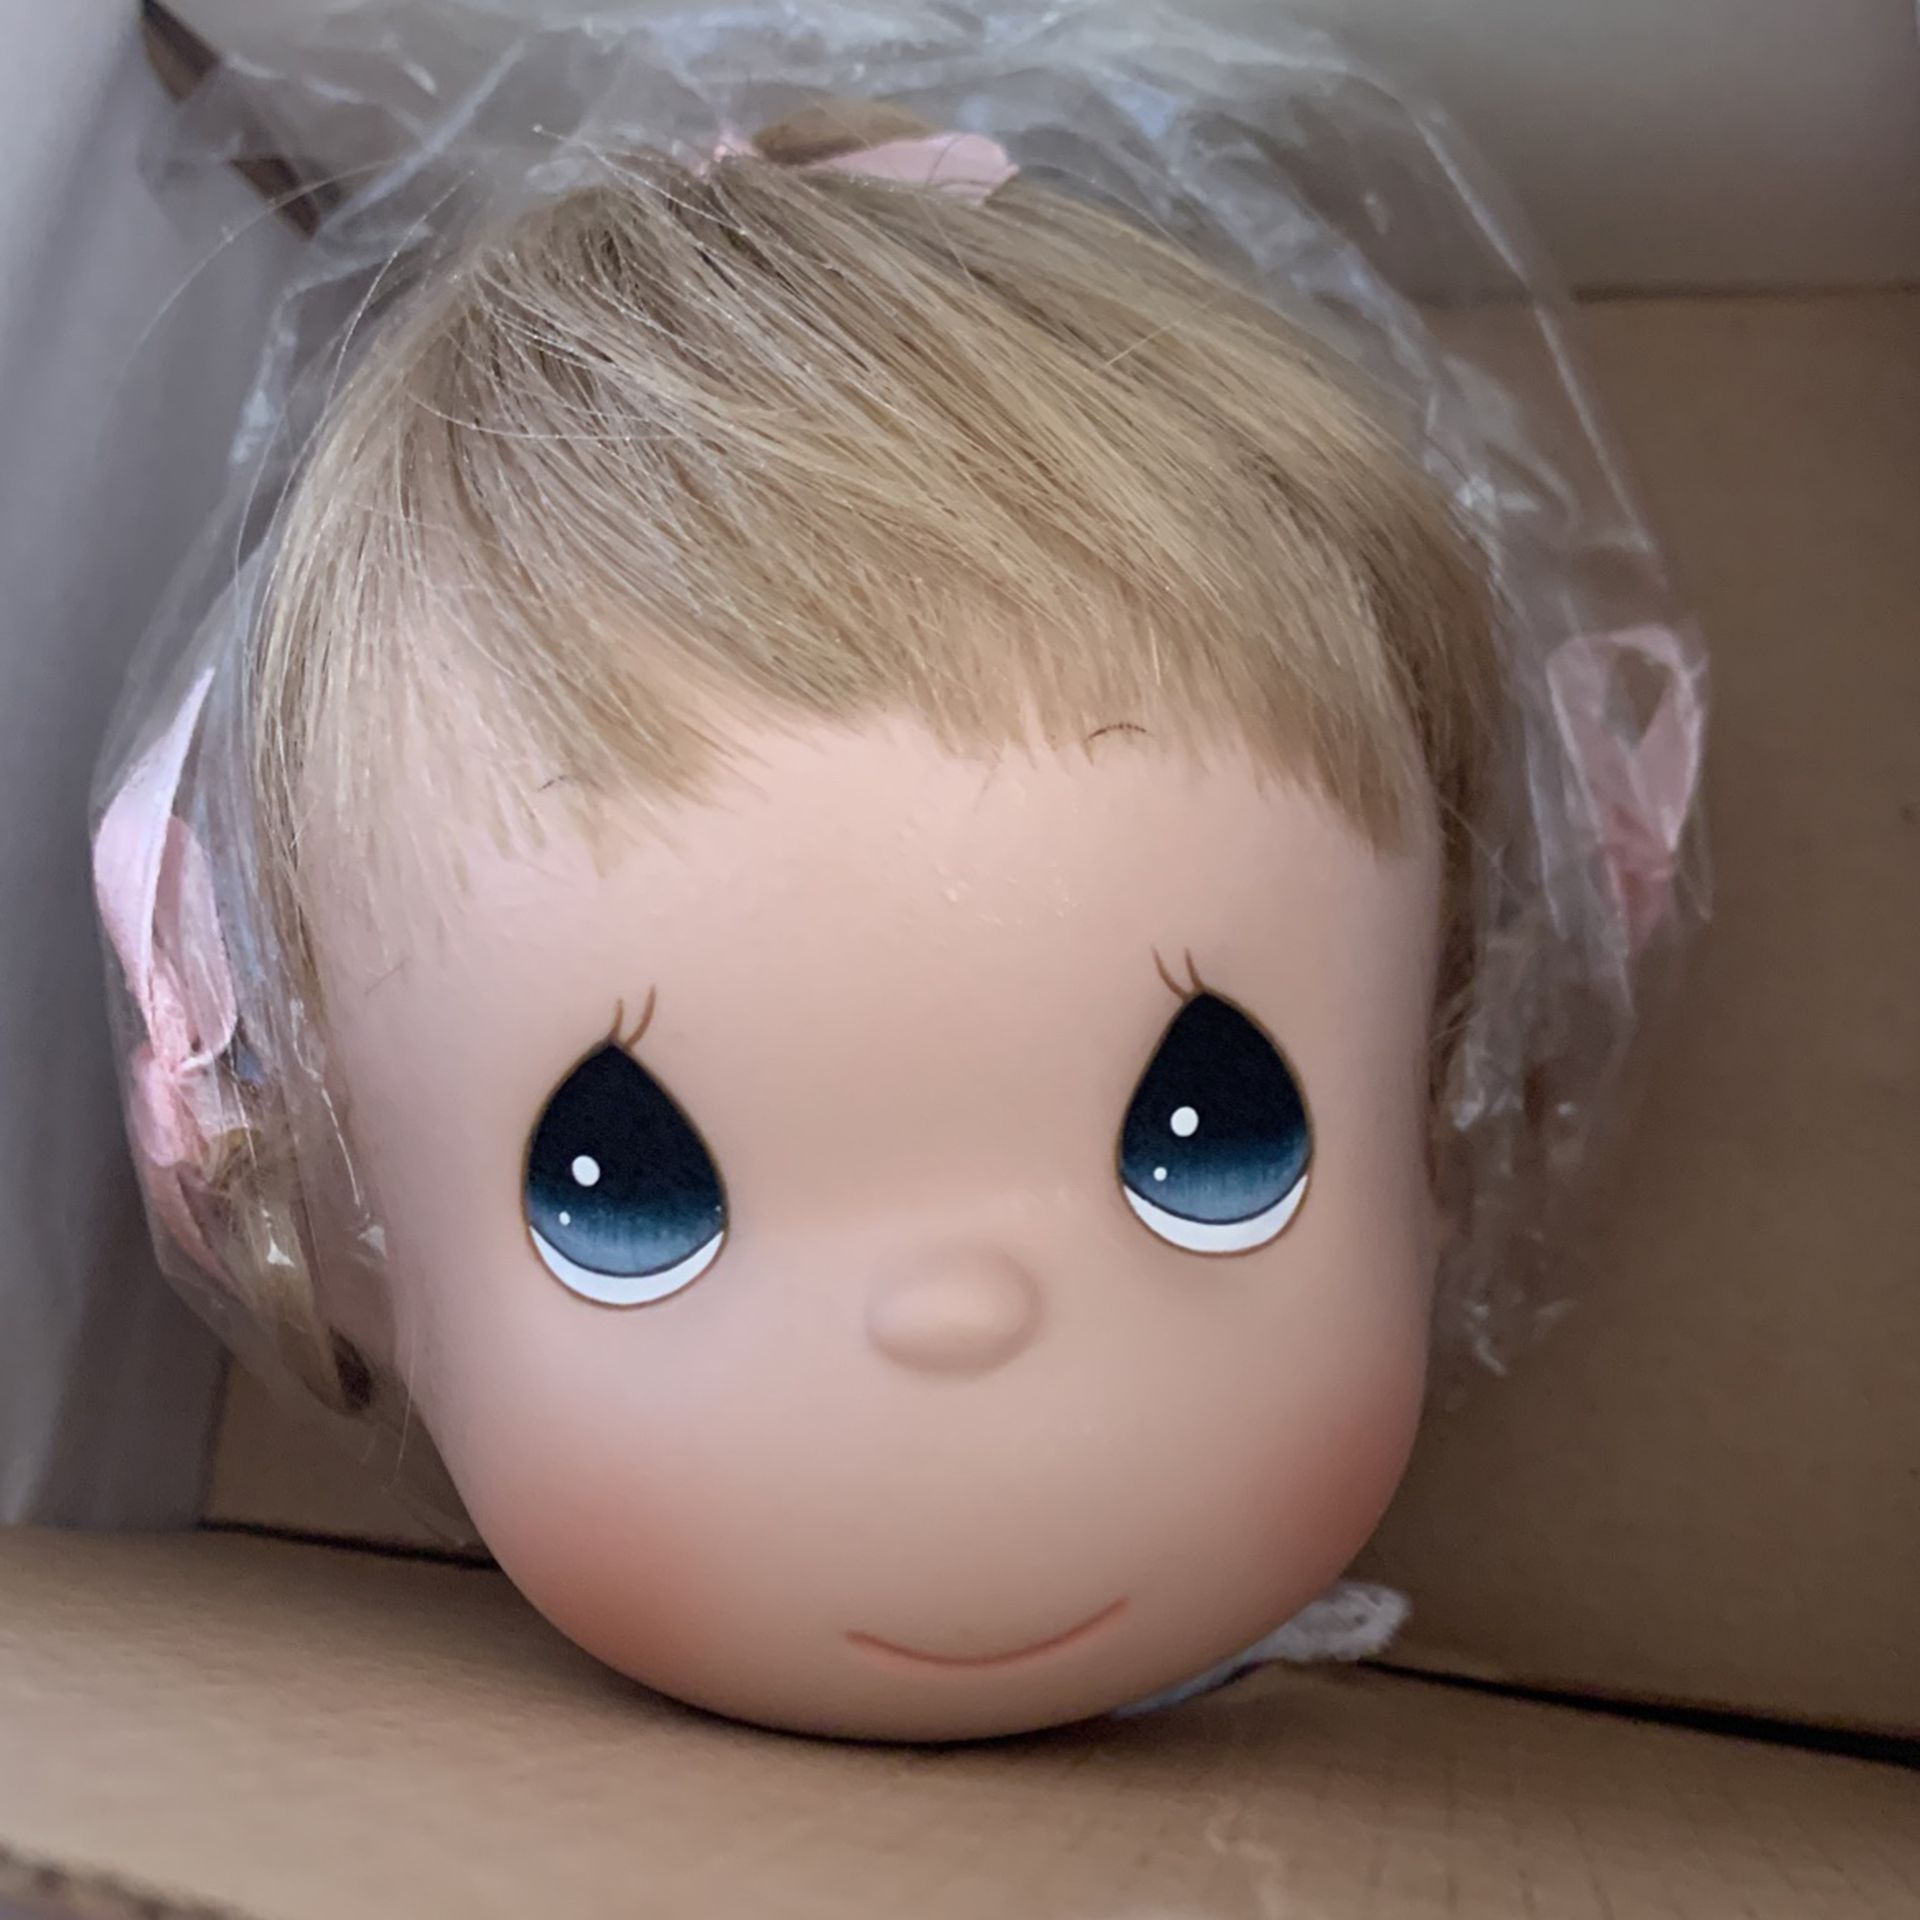 Beautiful, Precious Moments Collectible Doll